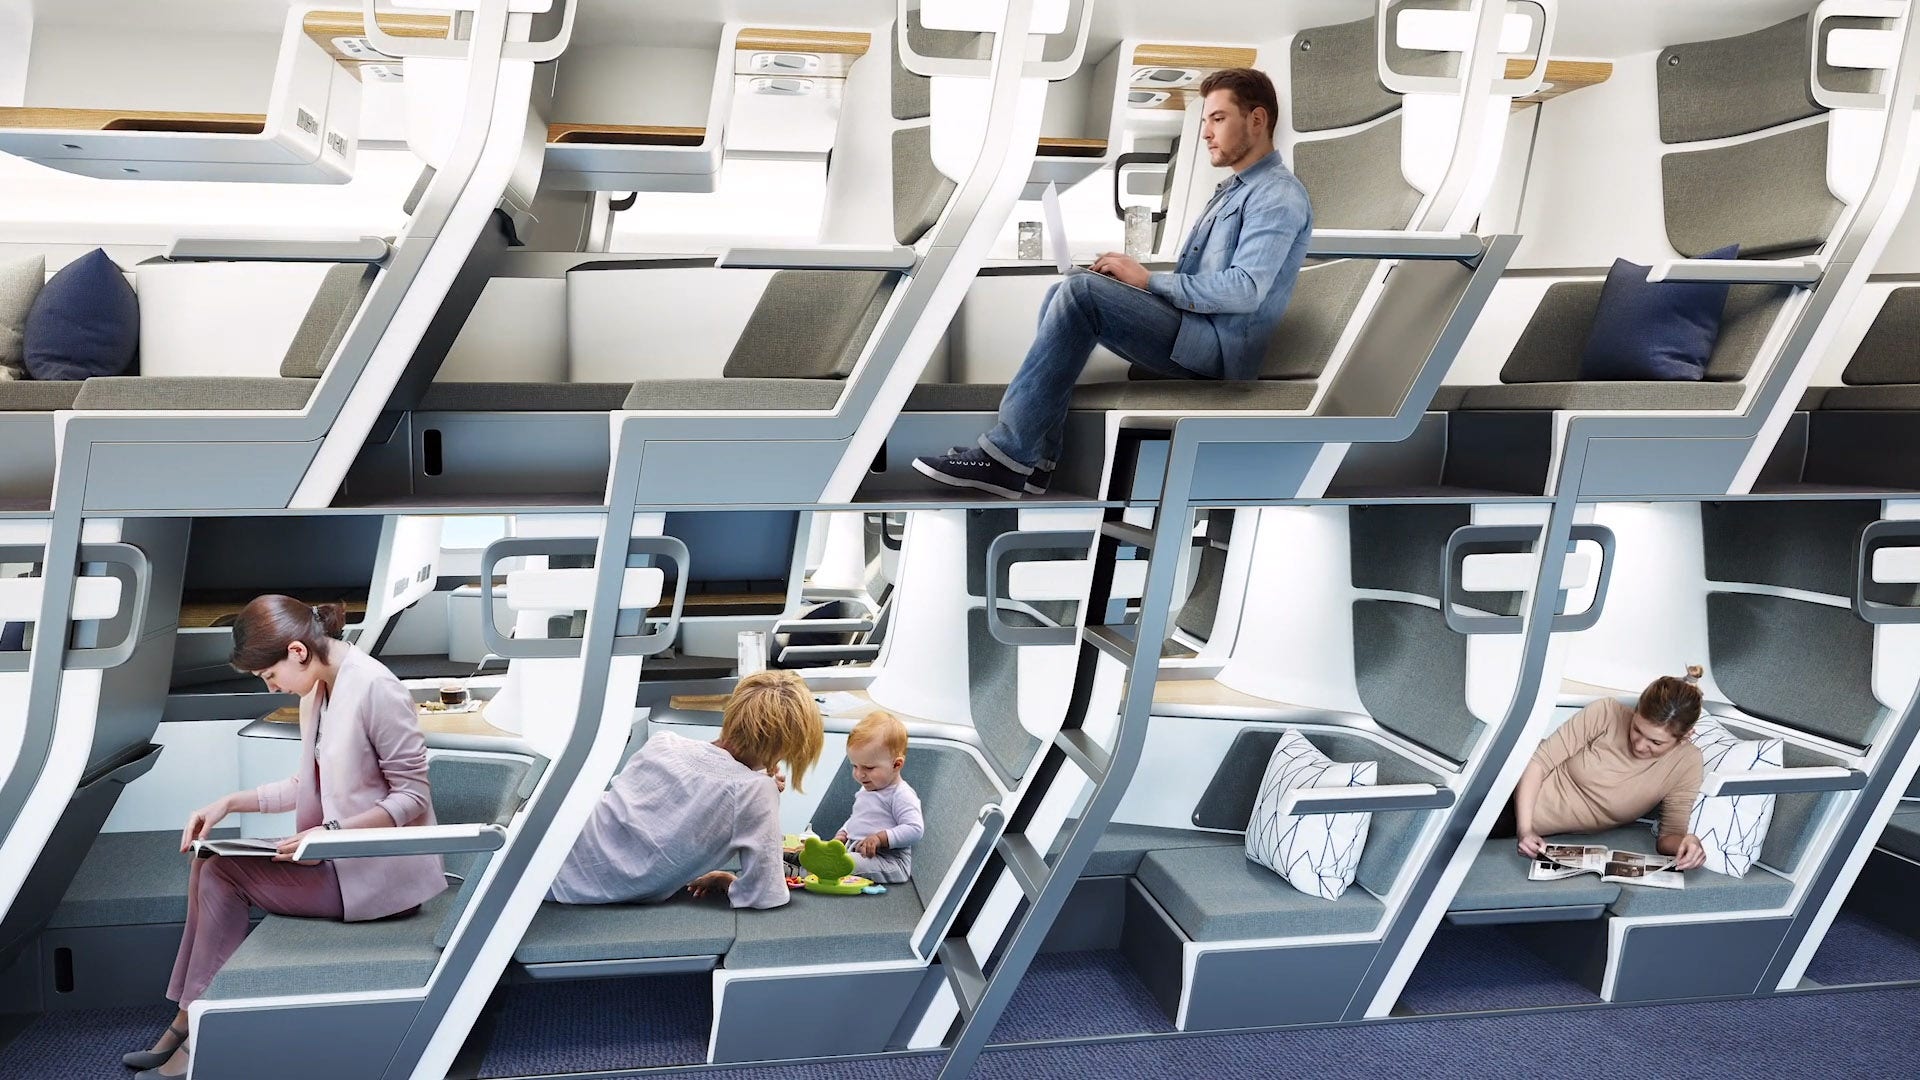 Double-Decker Airplane Seats Are Back with a New Design Prototype